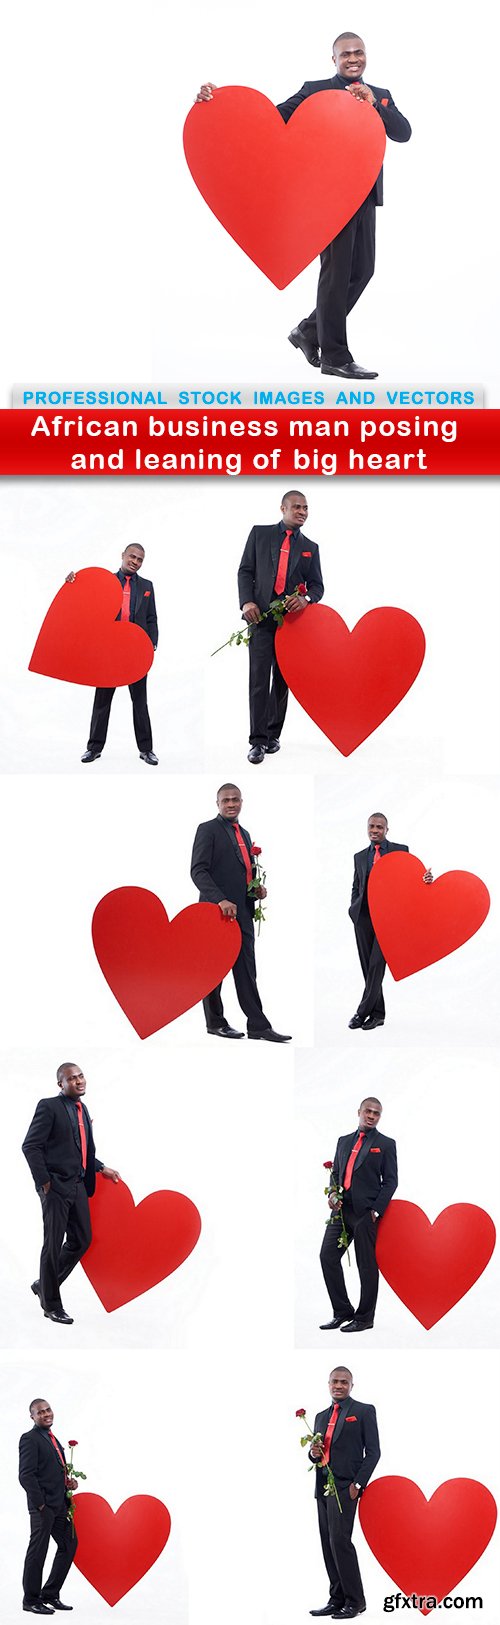 African business man posing and leaning of big heart - 9 UHQ JPEG